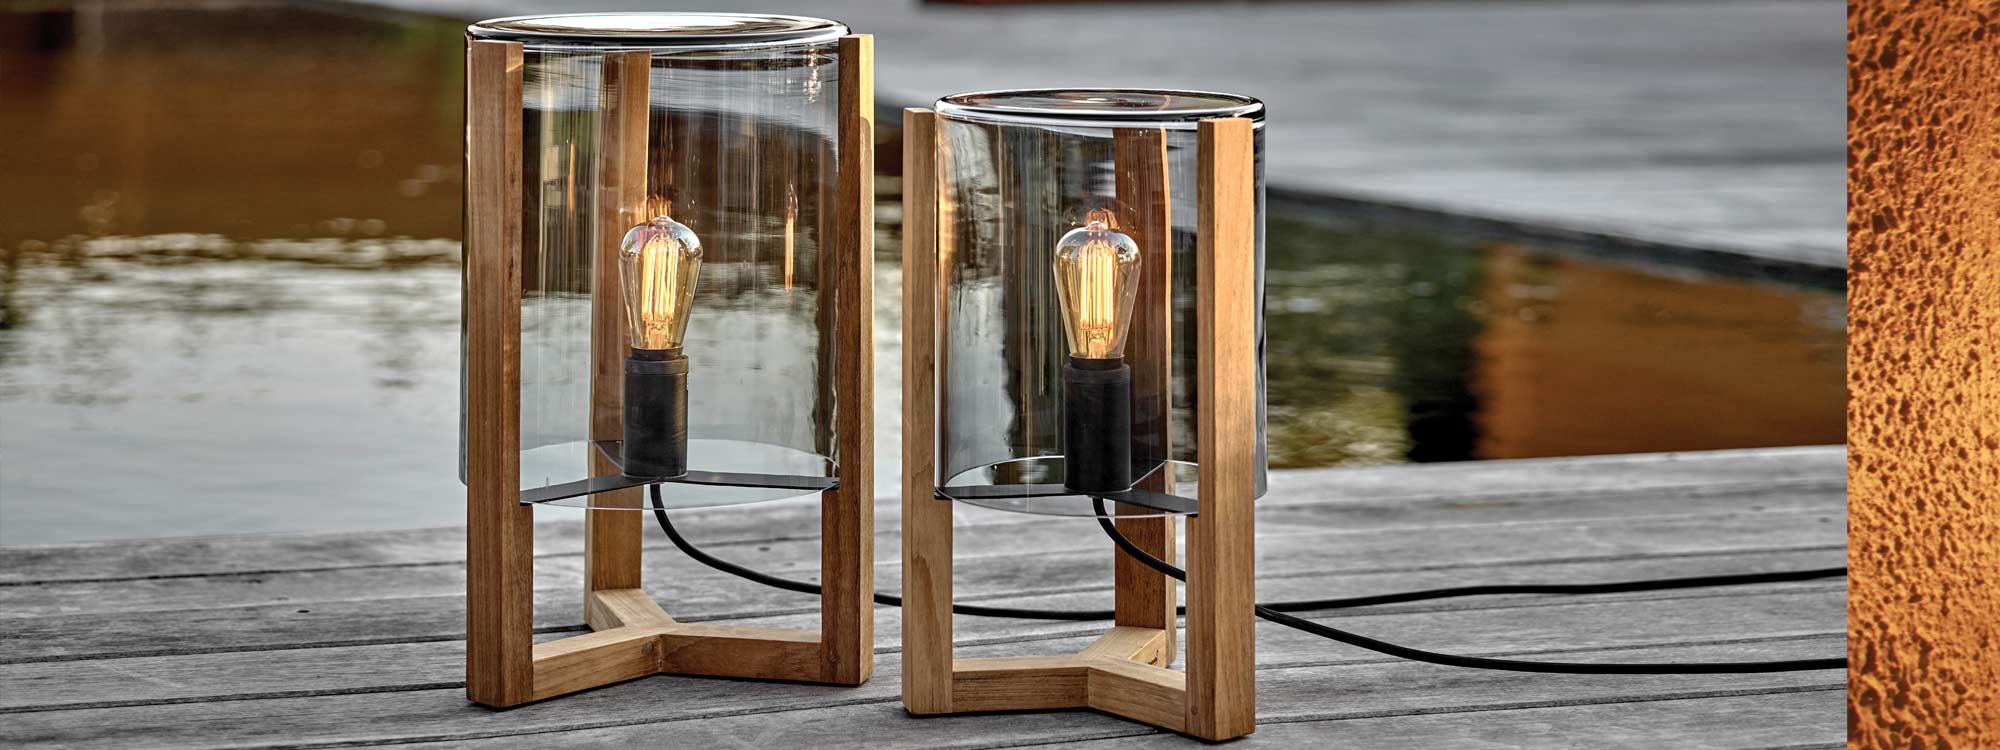 Image of pair of Royal Botania Tristar garden lanterns with teak frames and smoked glass lampshades & filament light bulbs